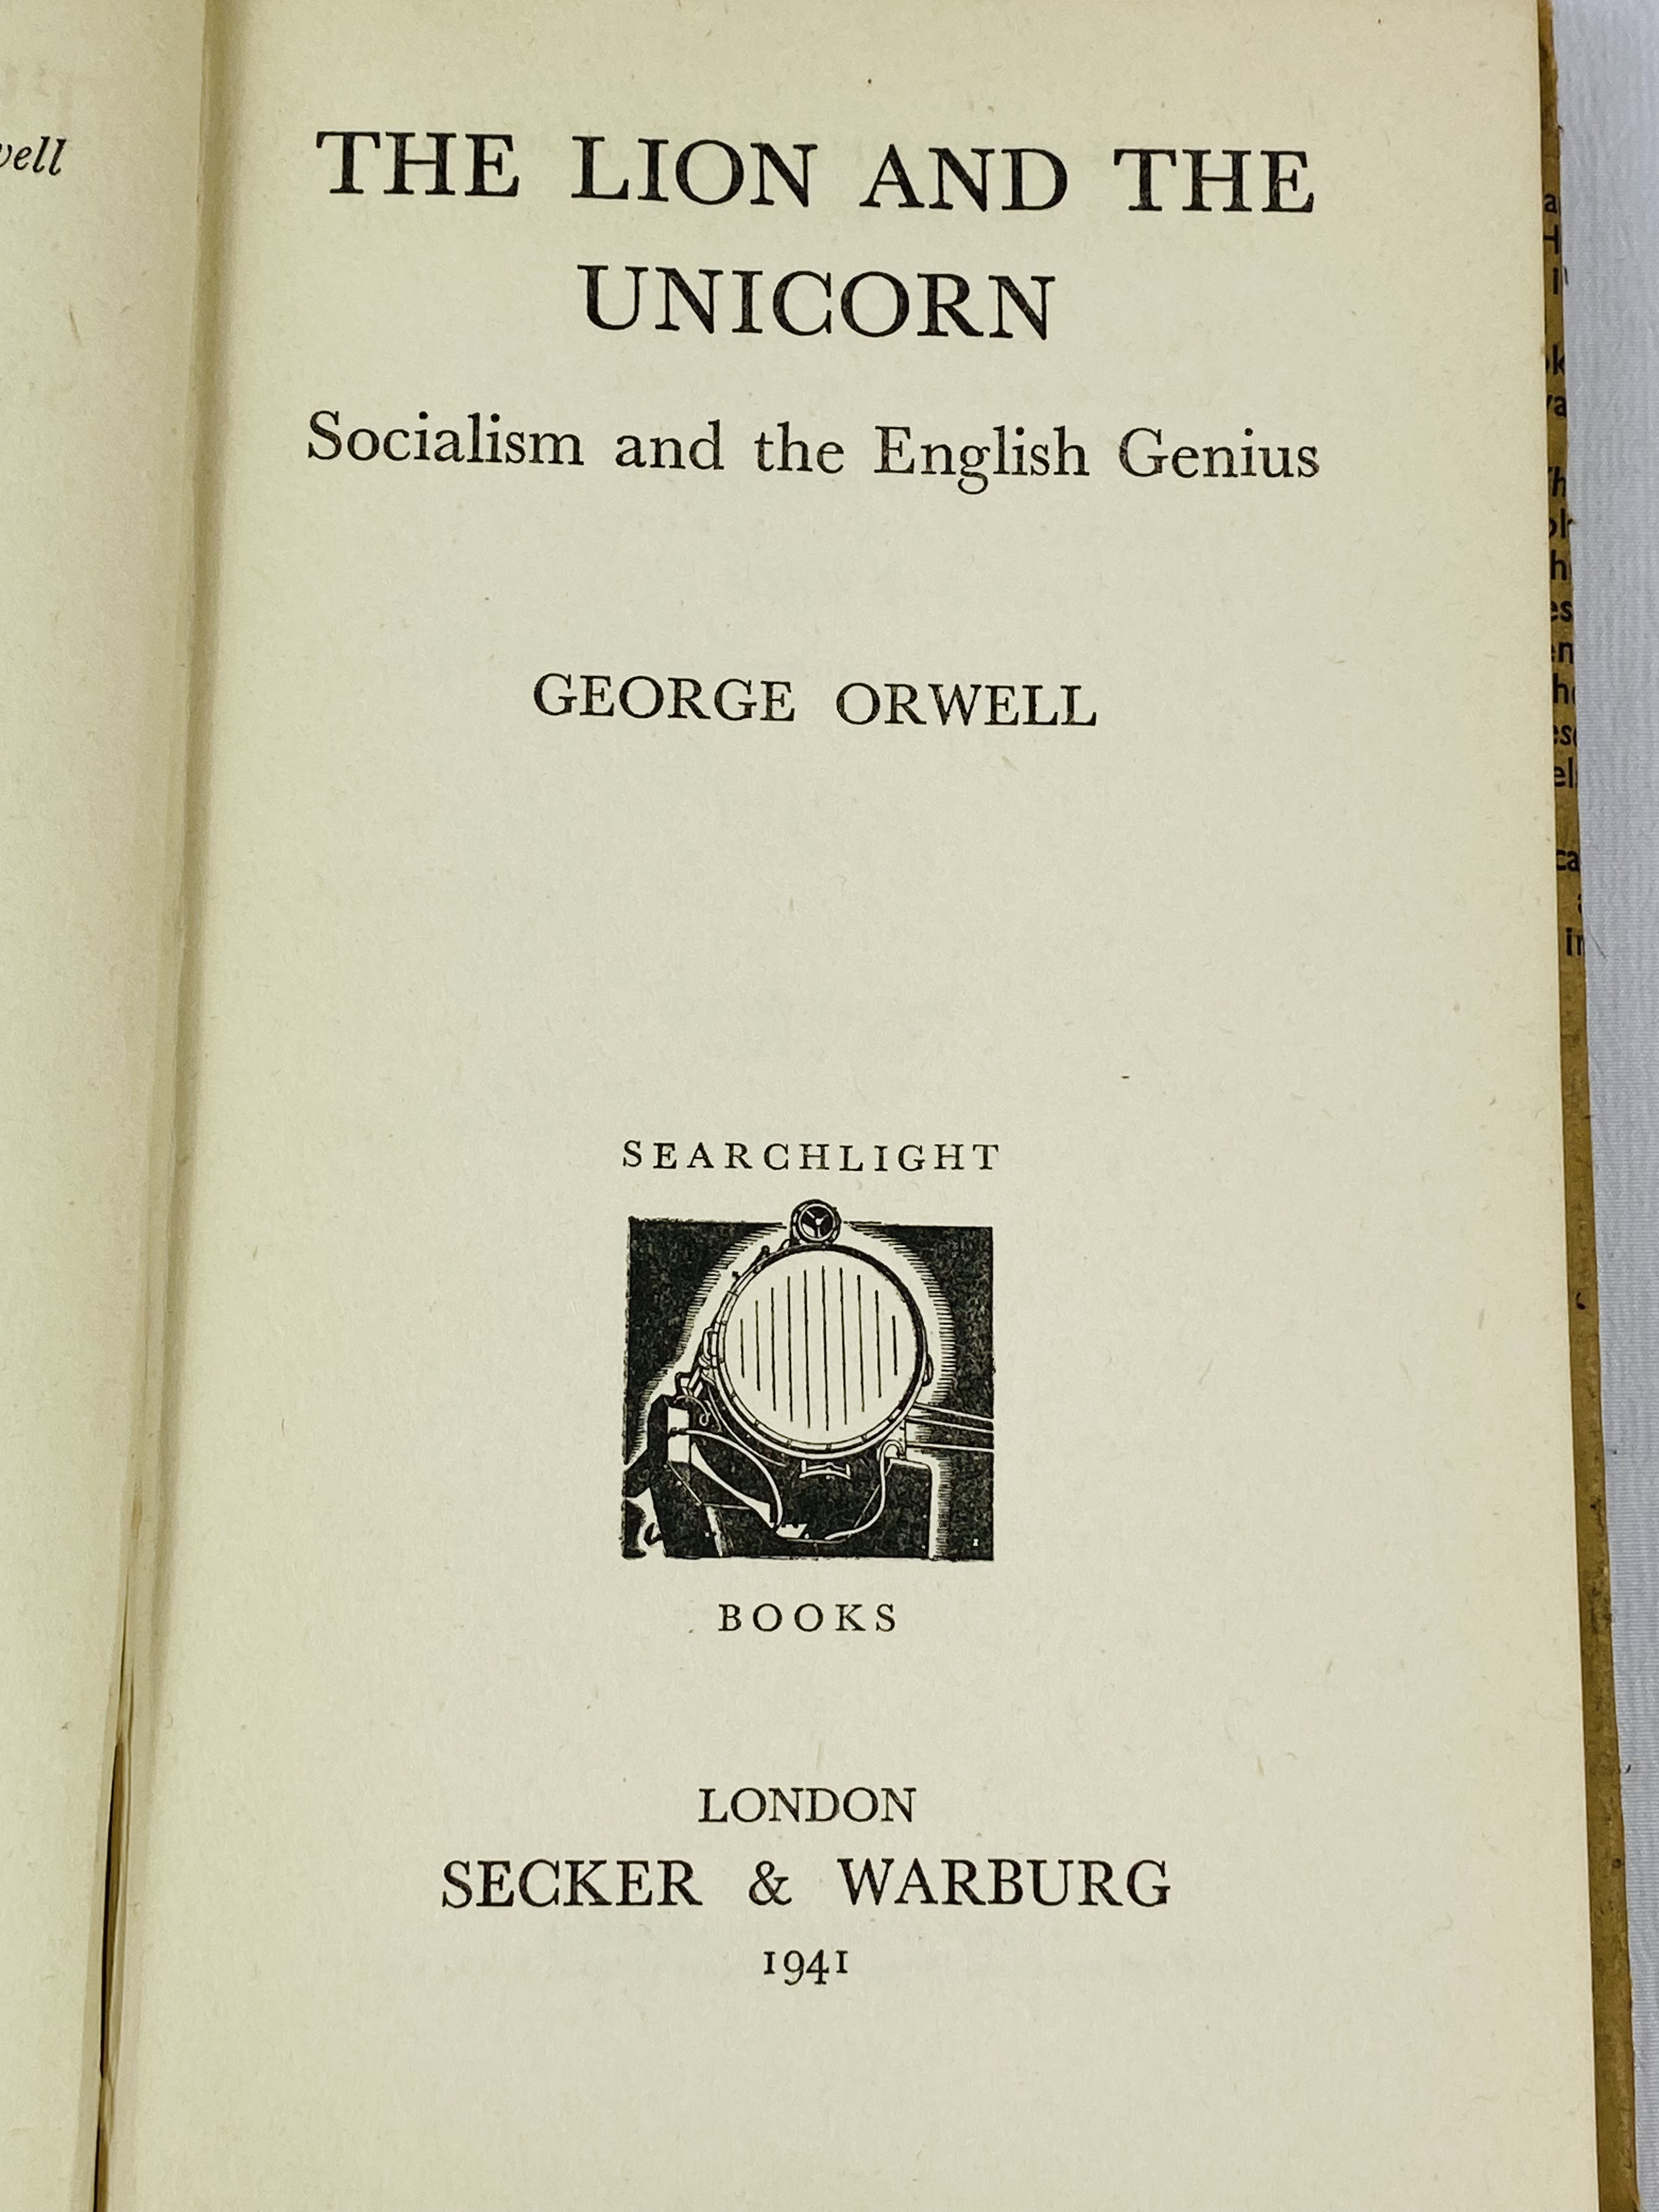 George Orwell, The Lion and the Unicorn, Searchlight Books No. 1, 1st edition - Image 3 of 4